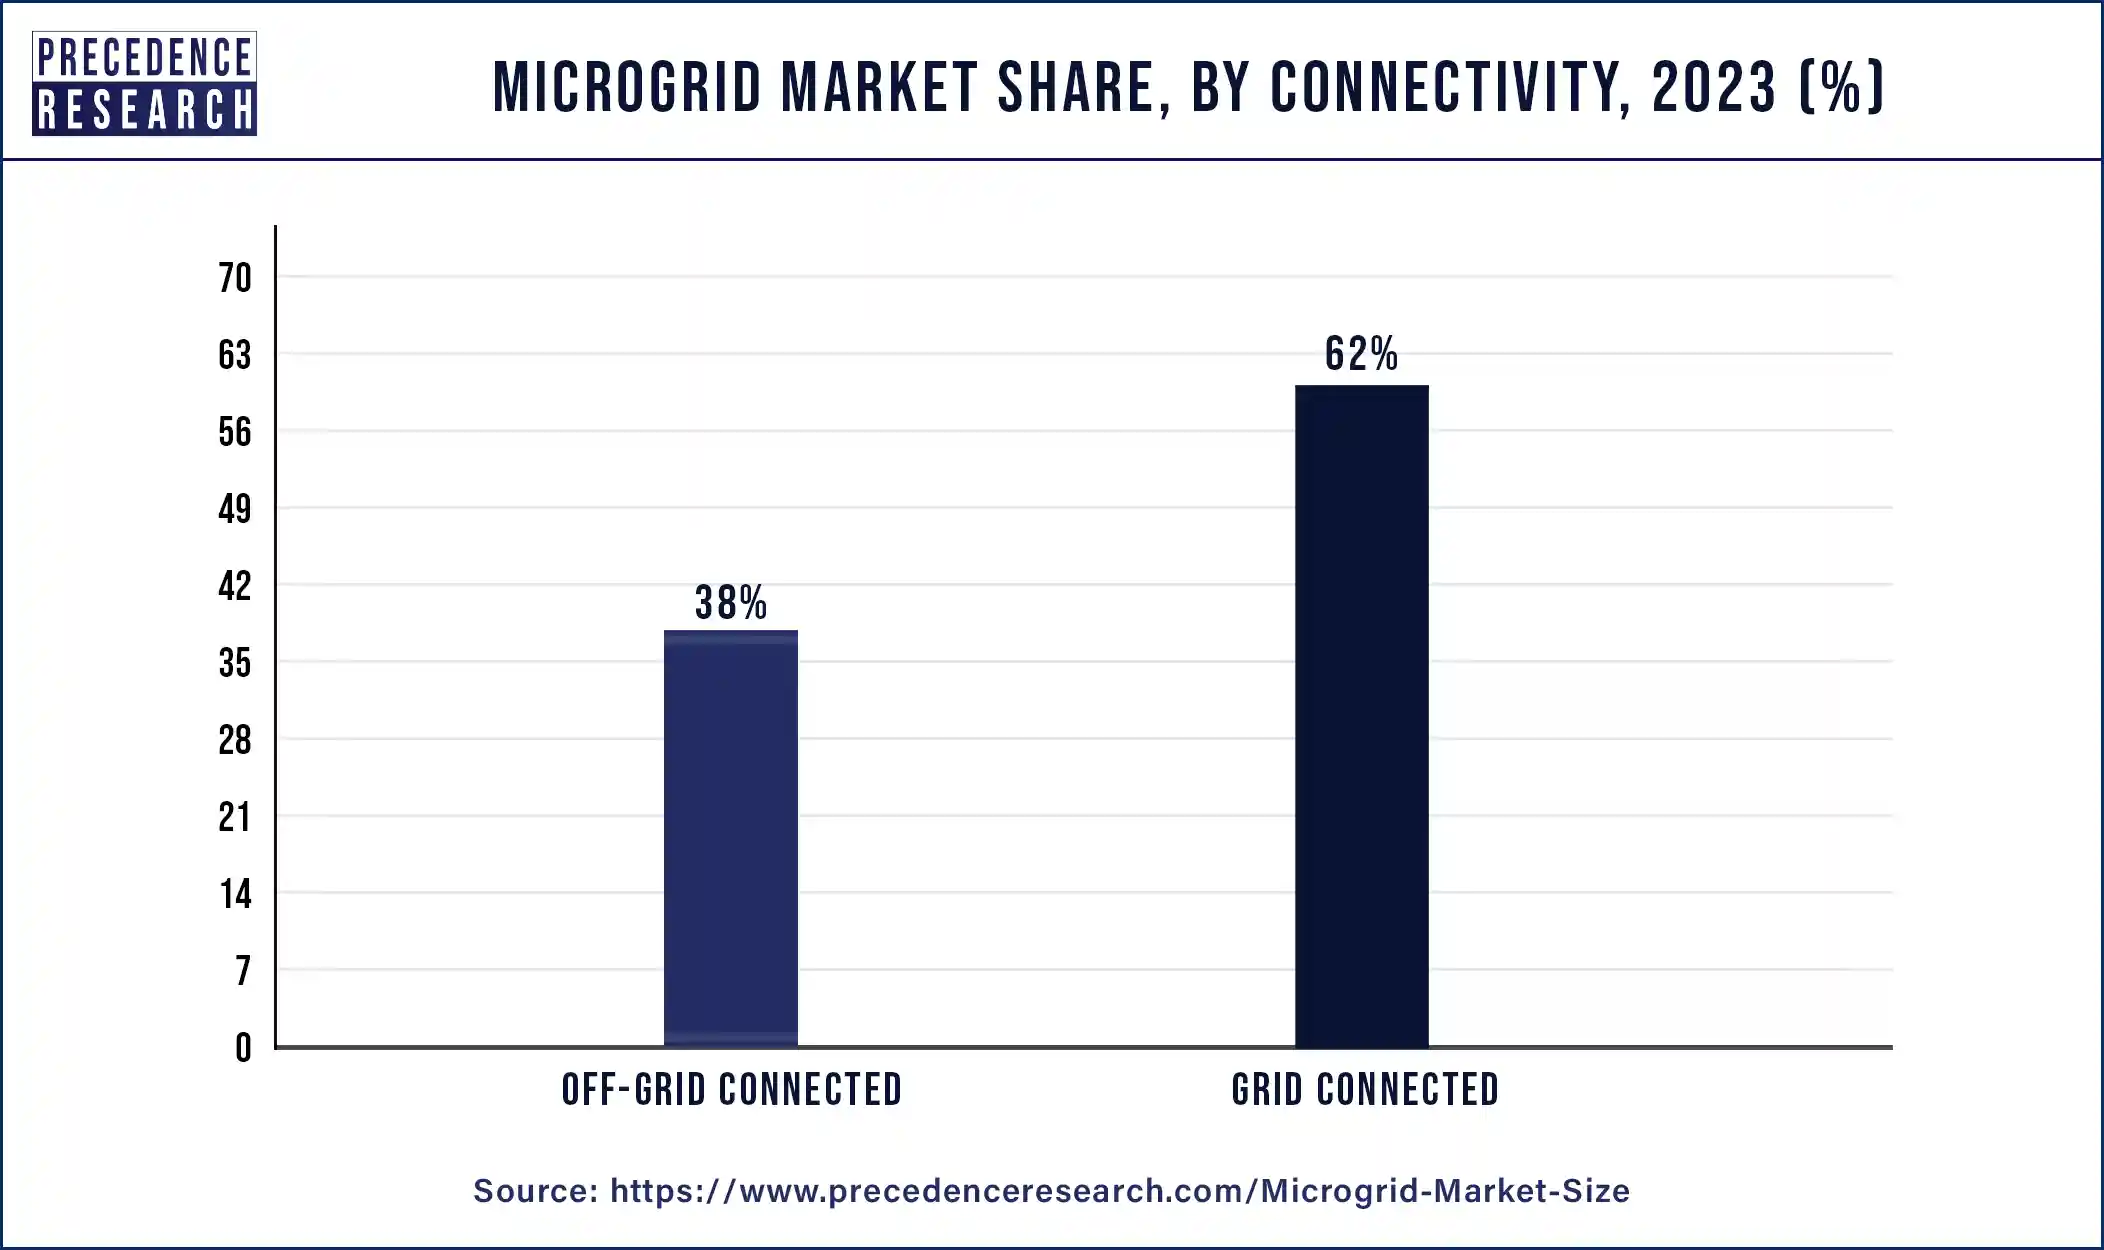 Microgrid Market Share, By Connectivity, 2023 (%)